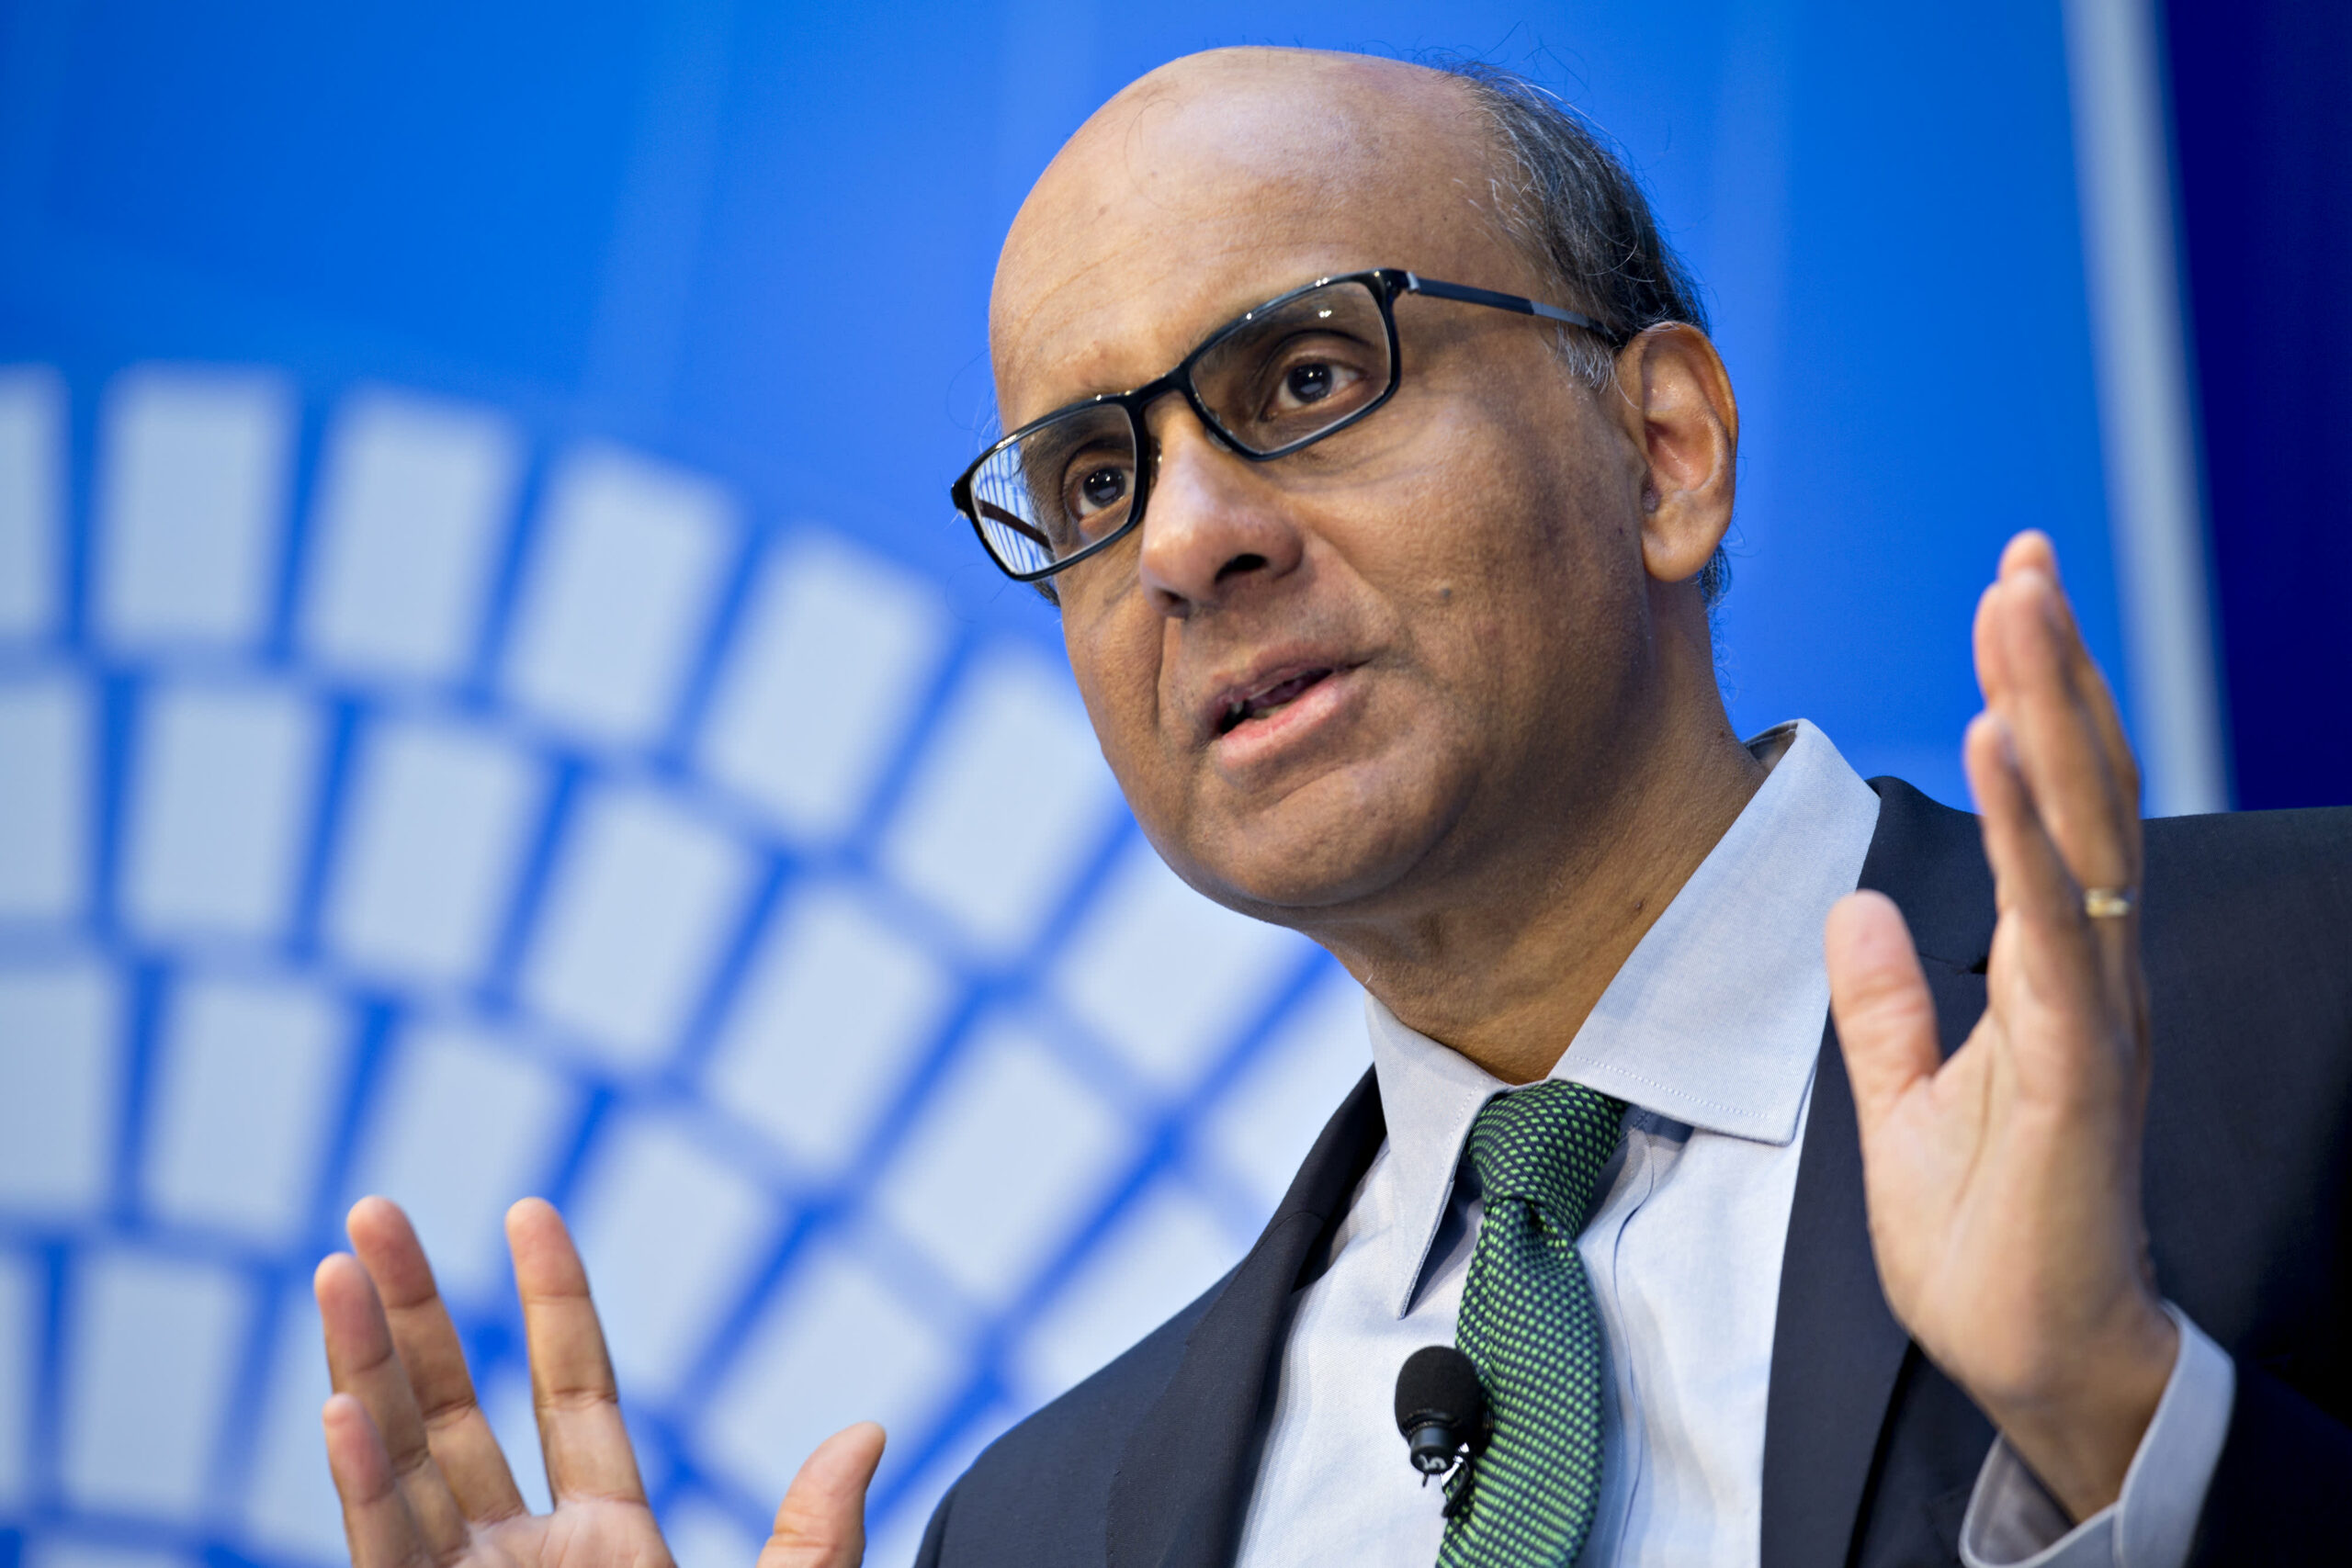 Singapore’s Tharman Shanmugaratnam on the subsequent pandemic after Covid